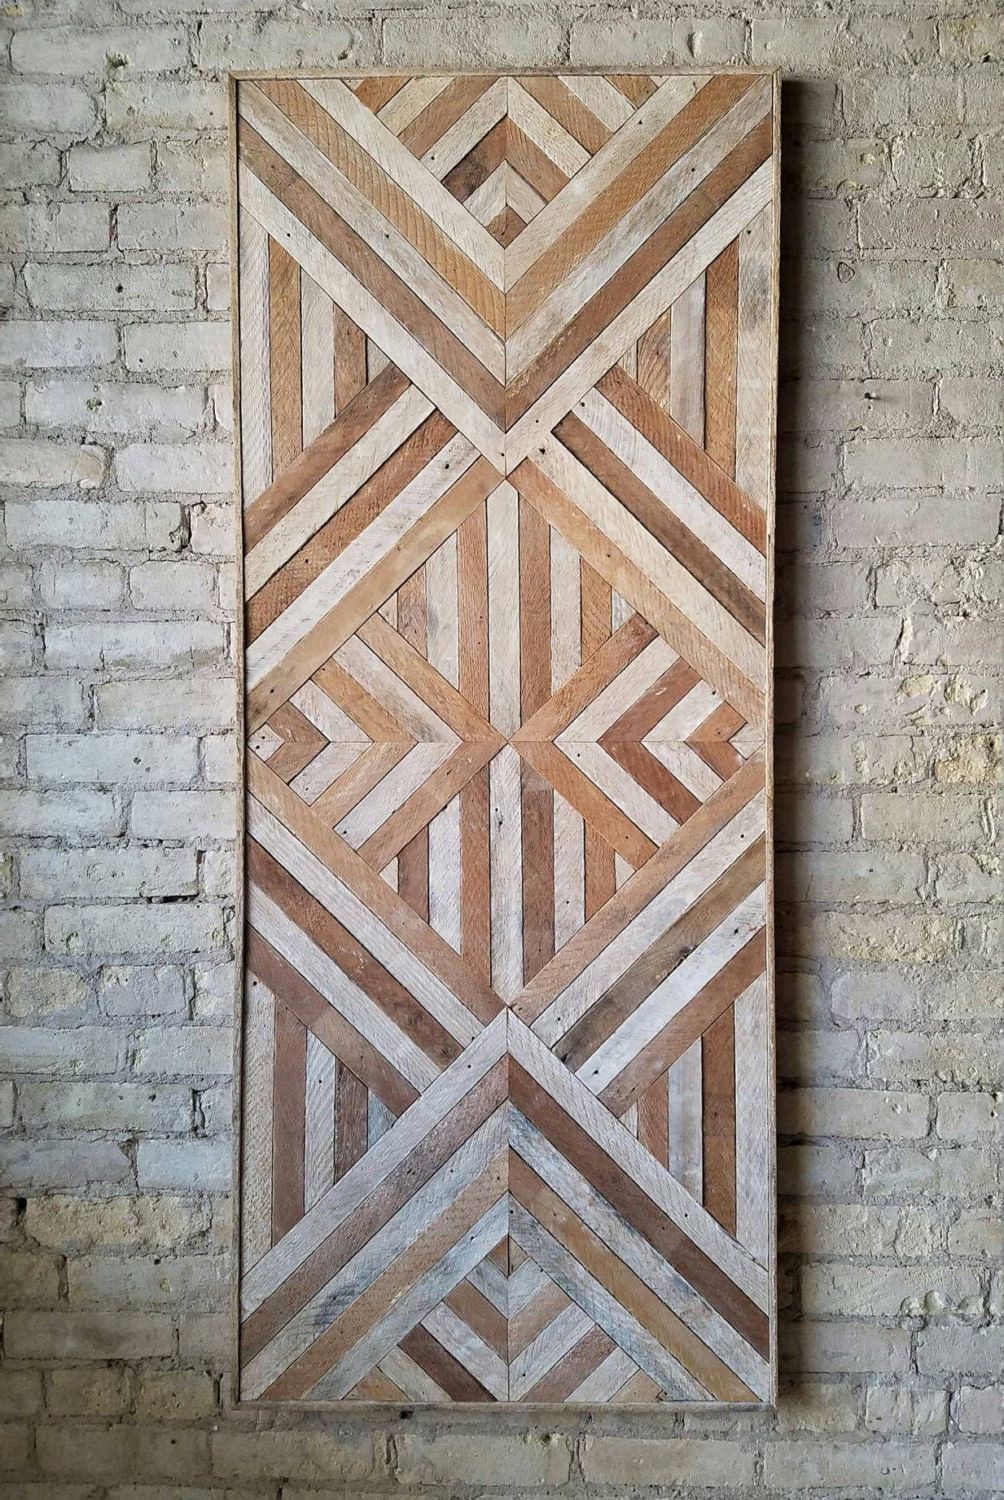 Well Known Reclaimed Wood Wall Art, Queen Headboard, Wood Wall Decor Intended For Geometric Wood Wall Art (View 13 of 20)